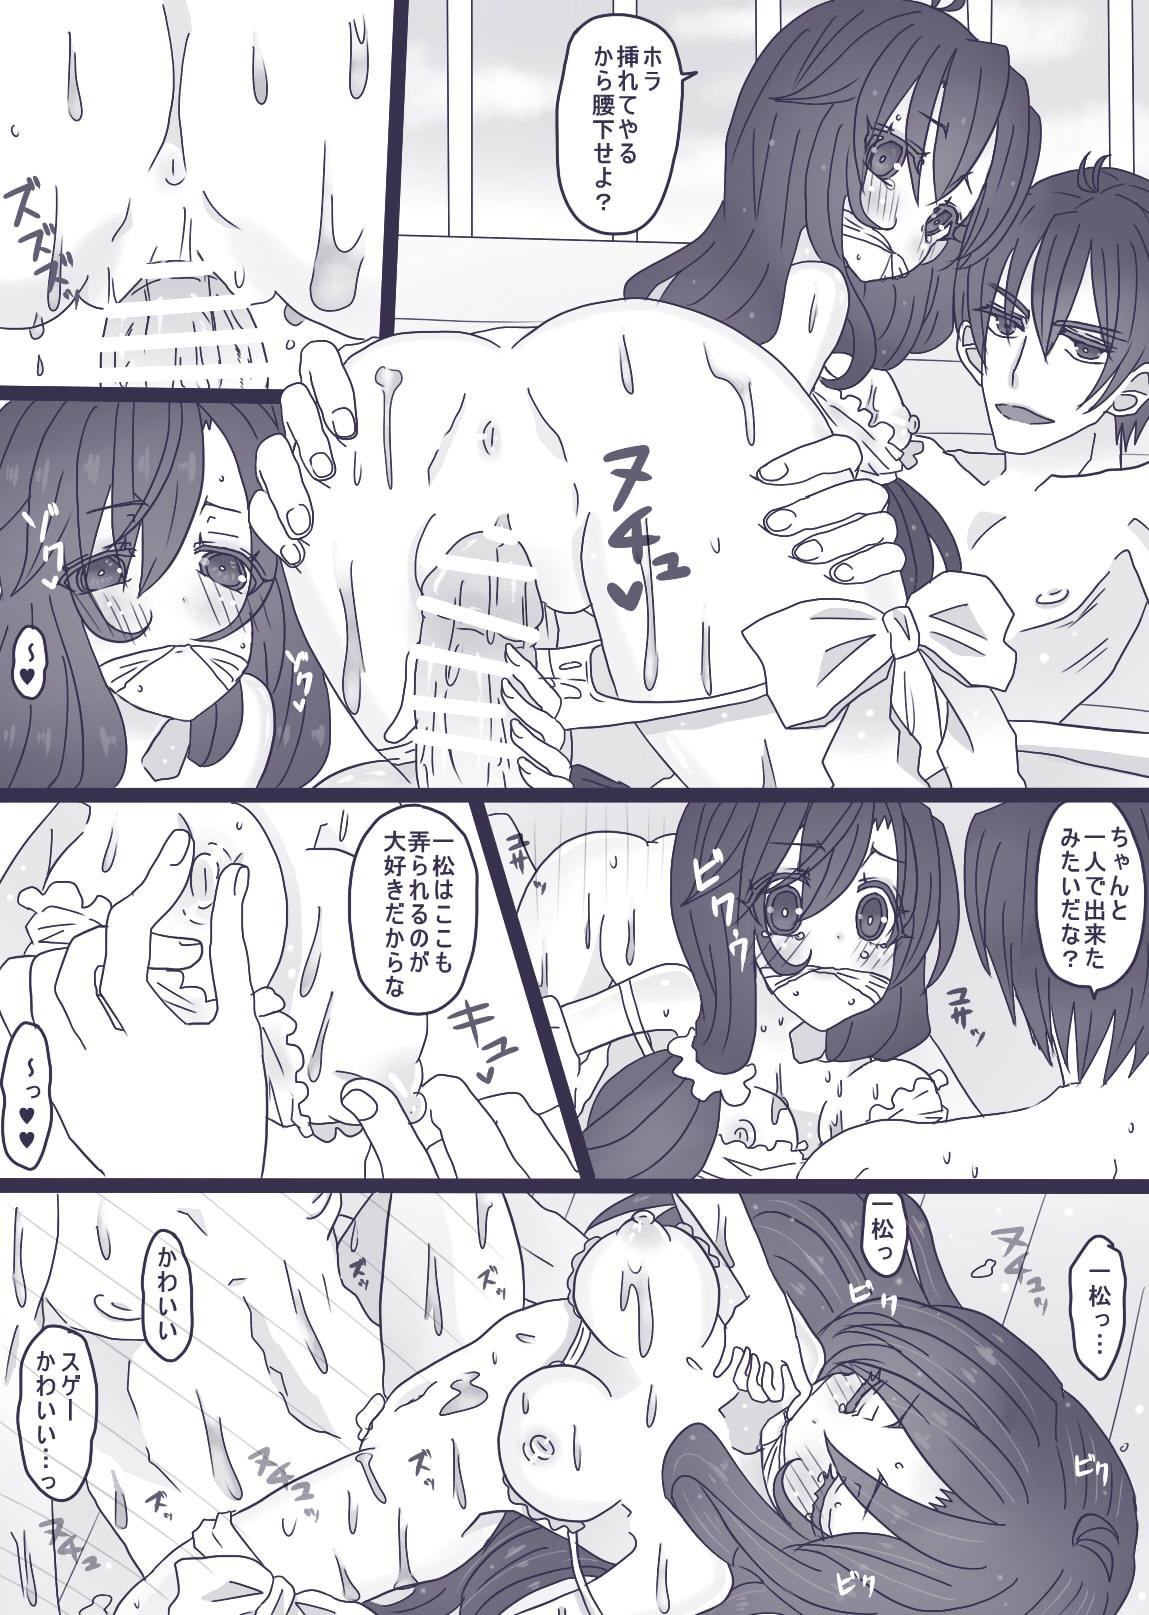 Watersports 水着回 Blowjob - Page 7